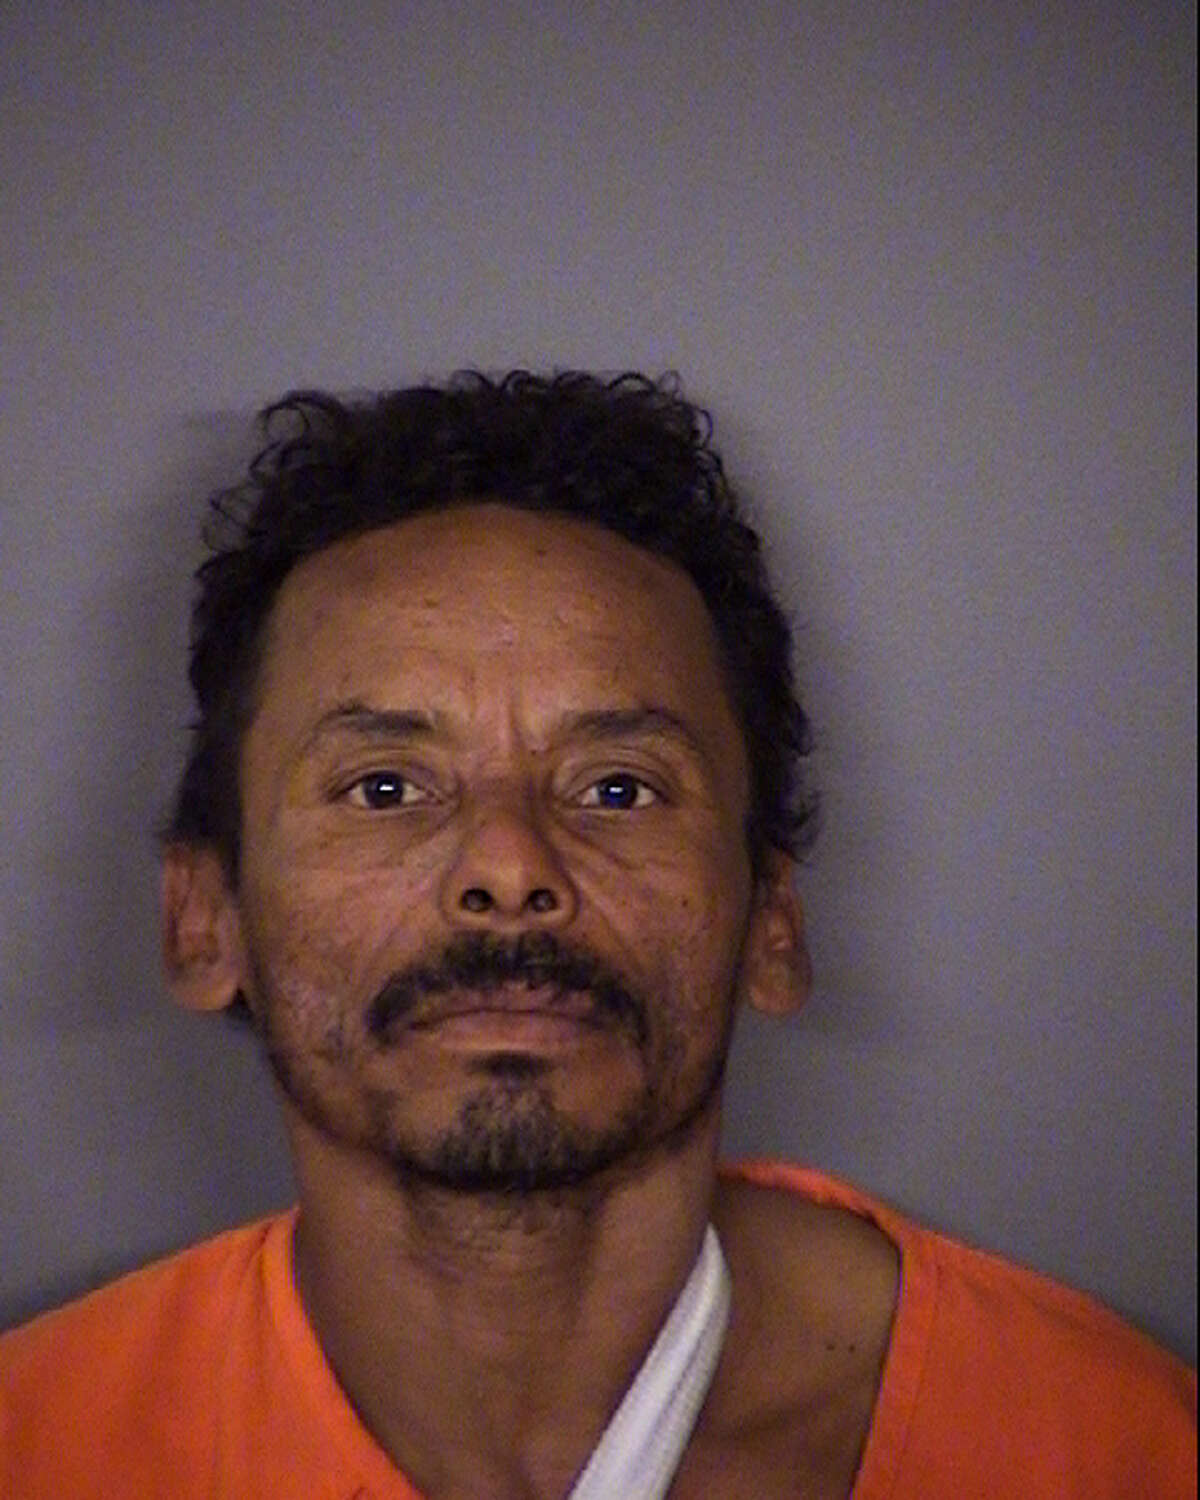 Francisco Ponce, 41, faces a charge of aggravated assault with a deadly weapon. He remains in the Bexar County Jail on a $20,000 bond.